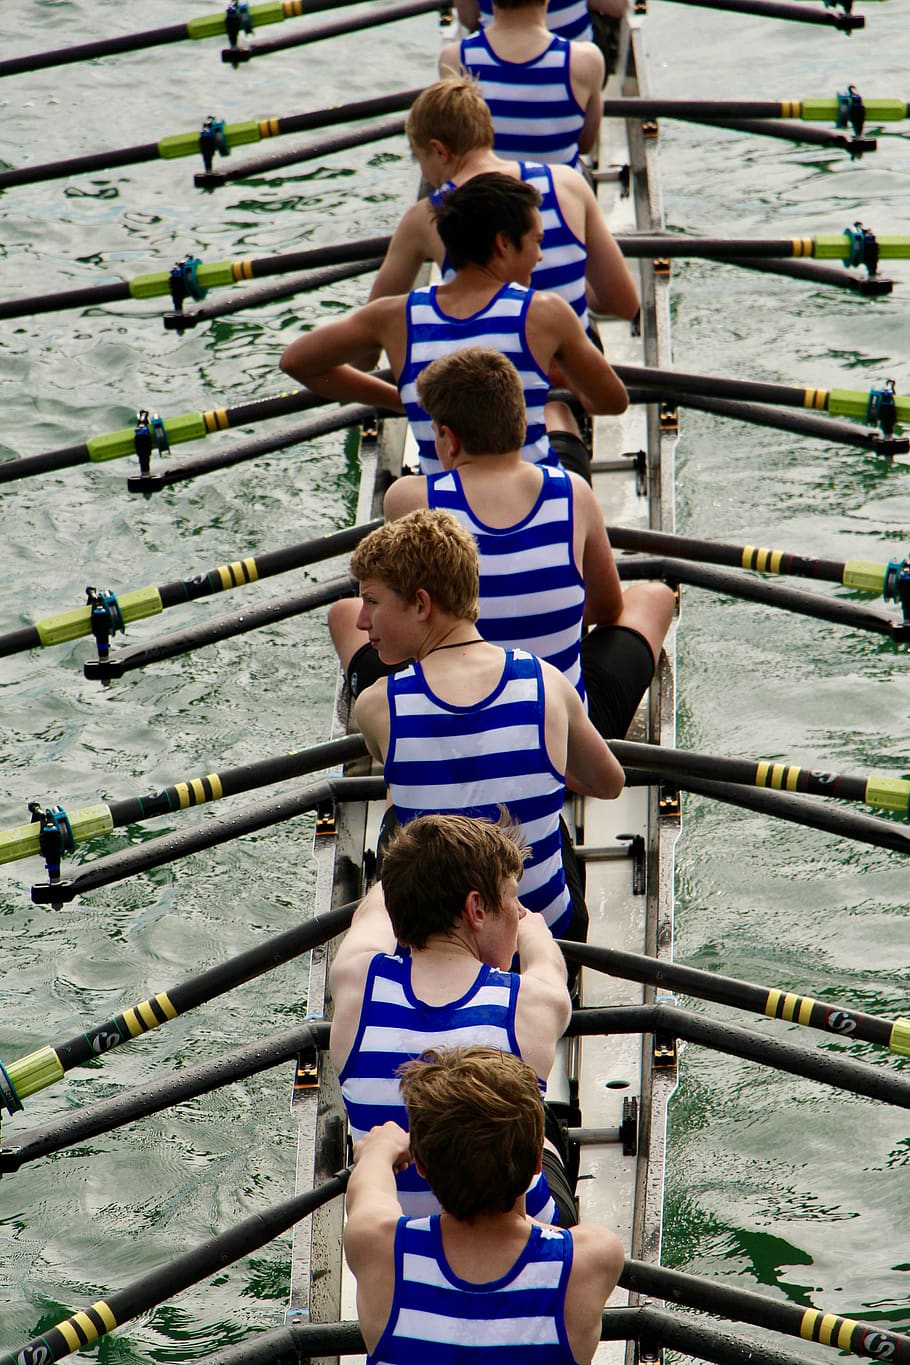 row, rowing, rowers, sport, school sport, blue and white, water, water sports, boat, team